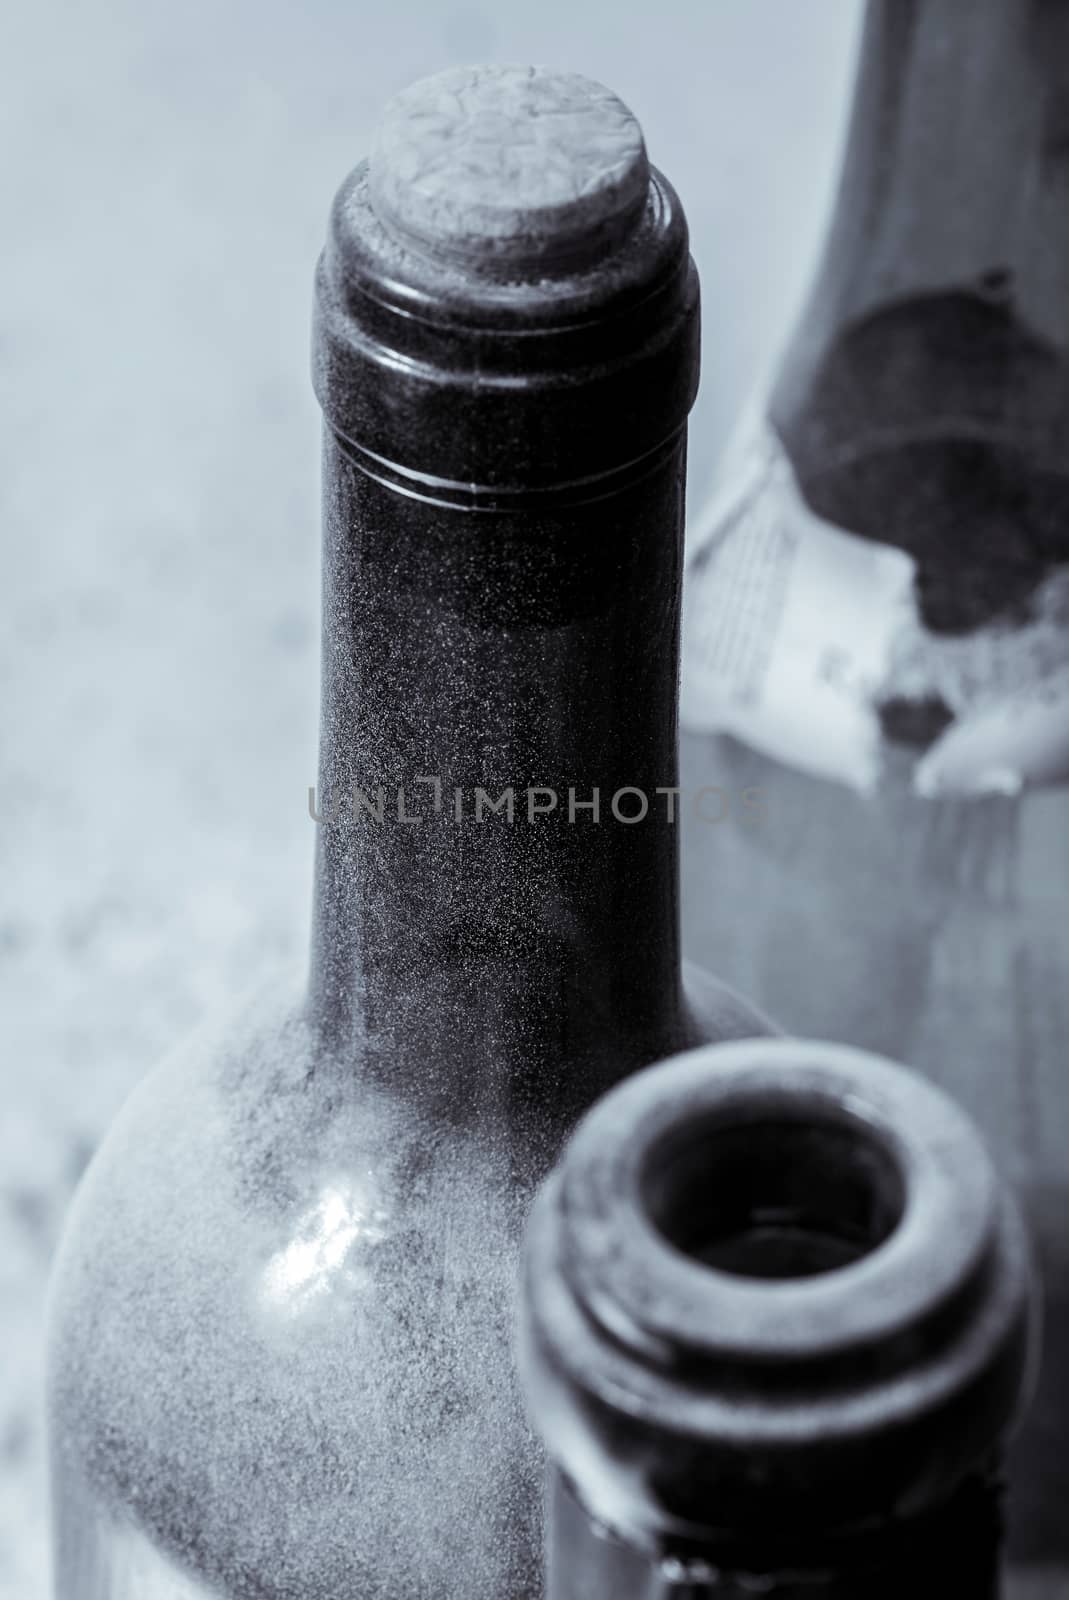 Some very old wine bottles - in  Black and White shot. by kerdkanno